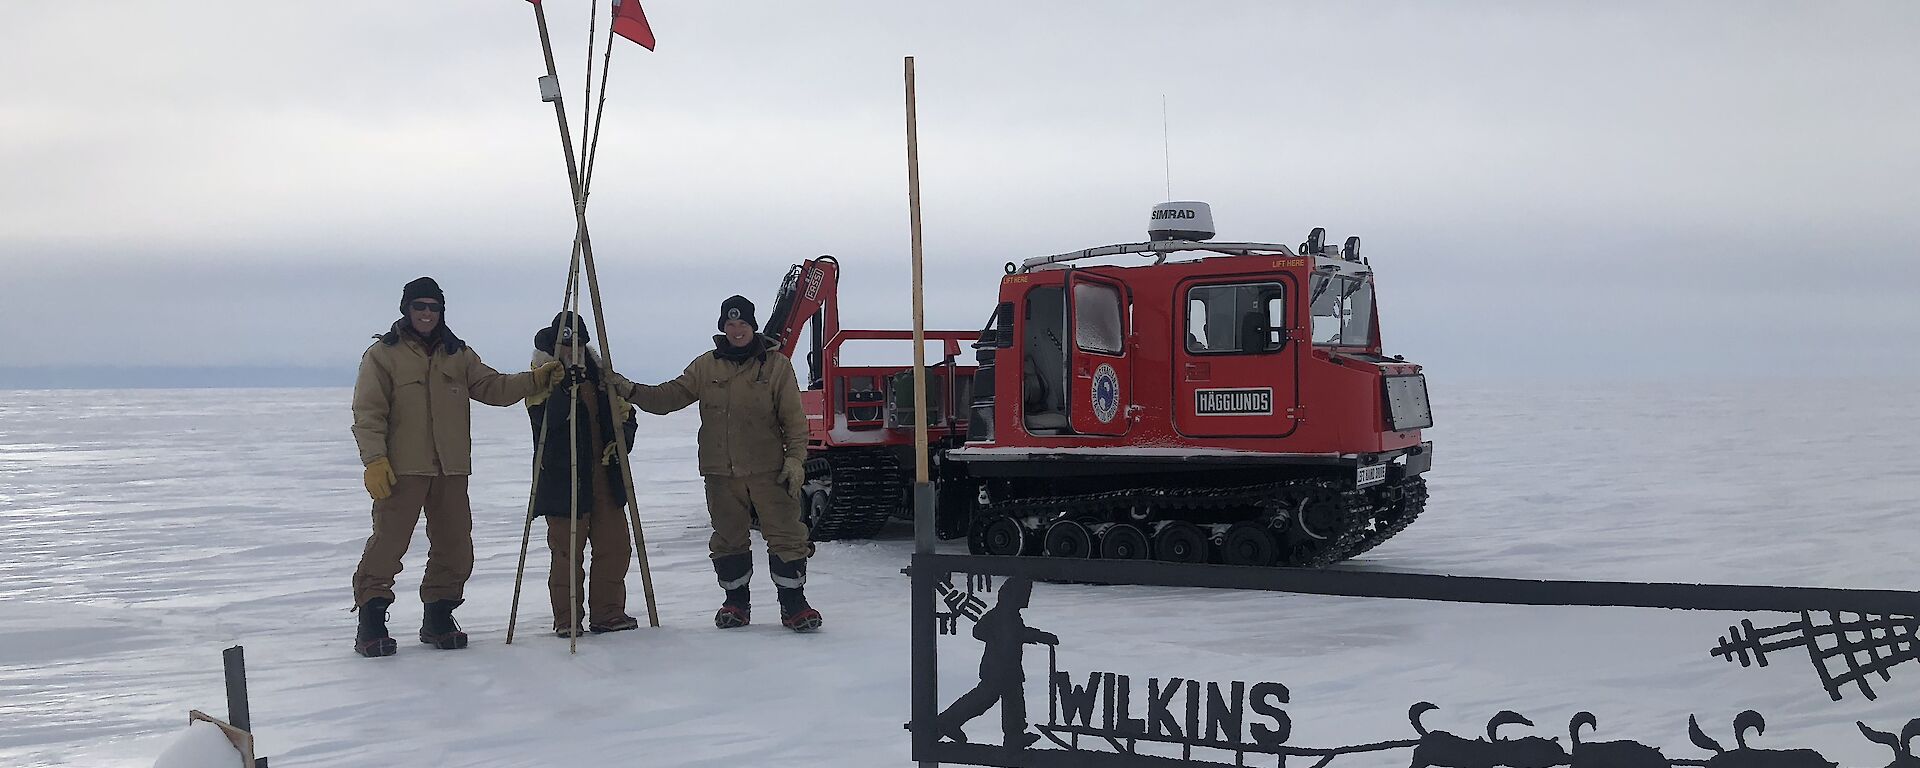 Three cane team members, holding the canes, with the red hagg and the wilkins sign in view on a cloudy day